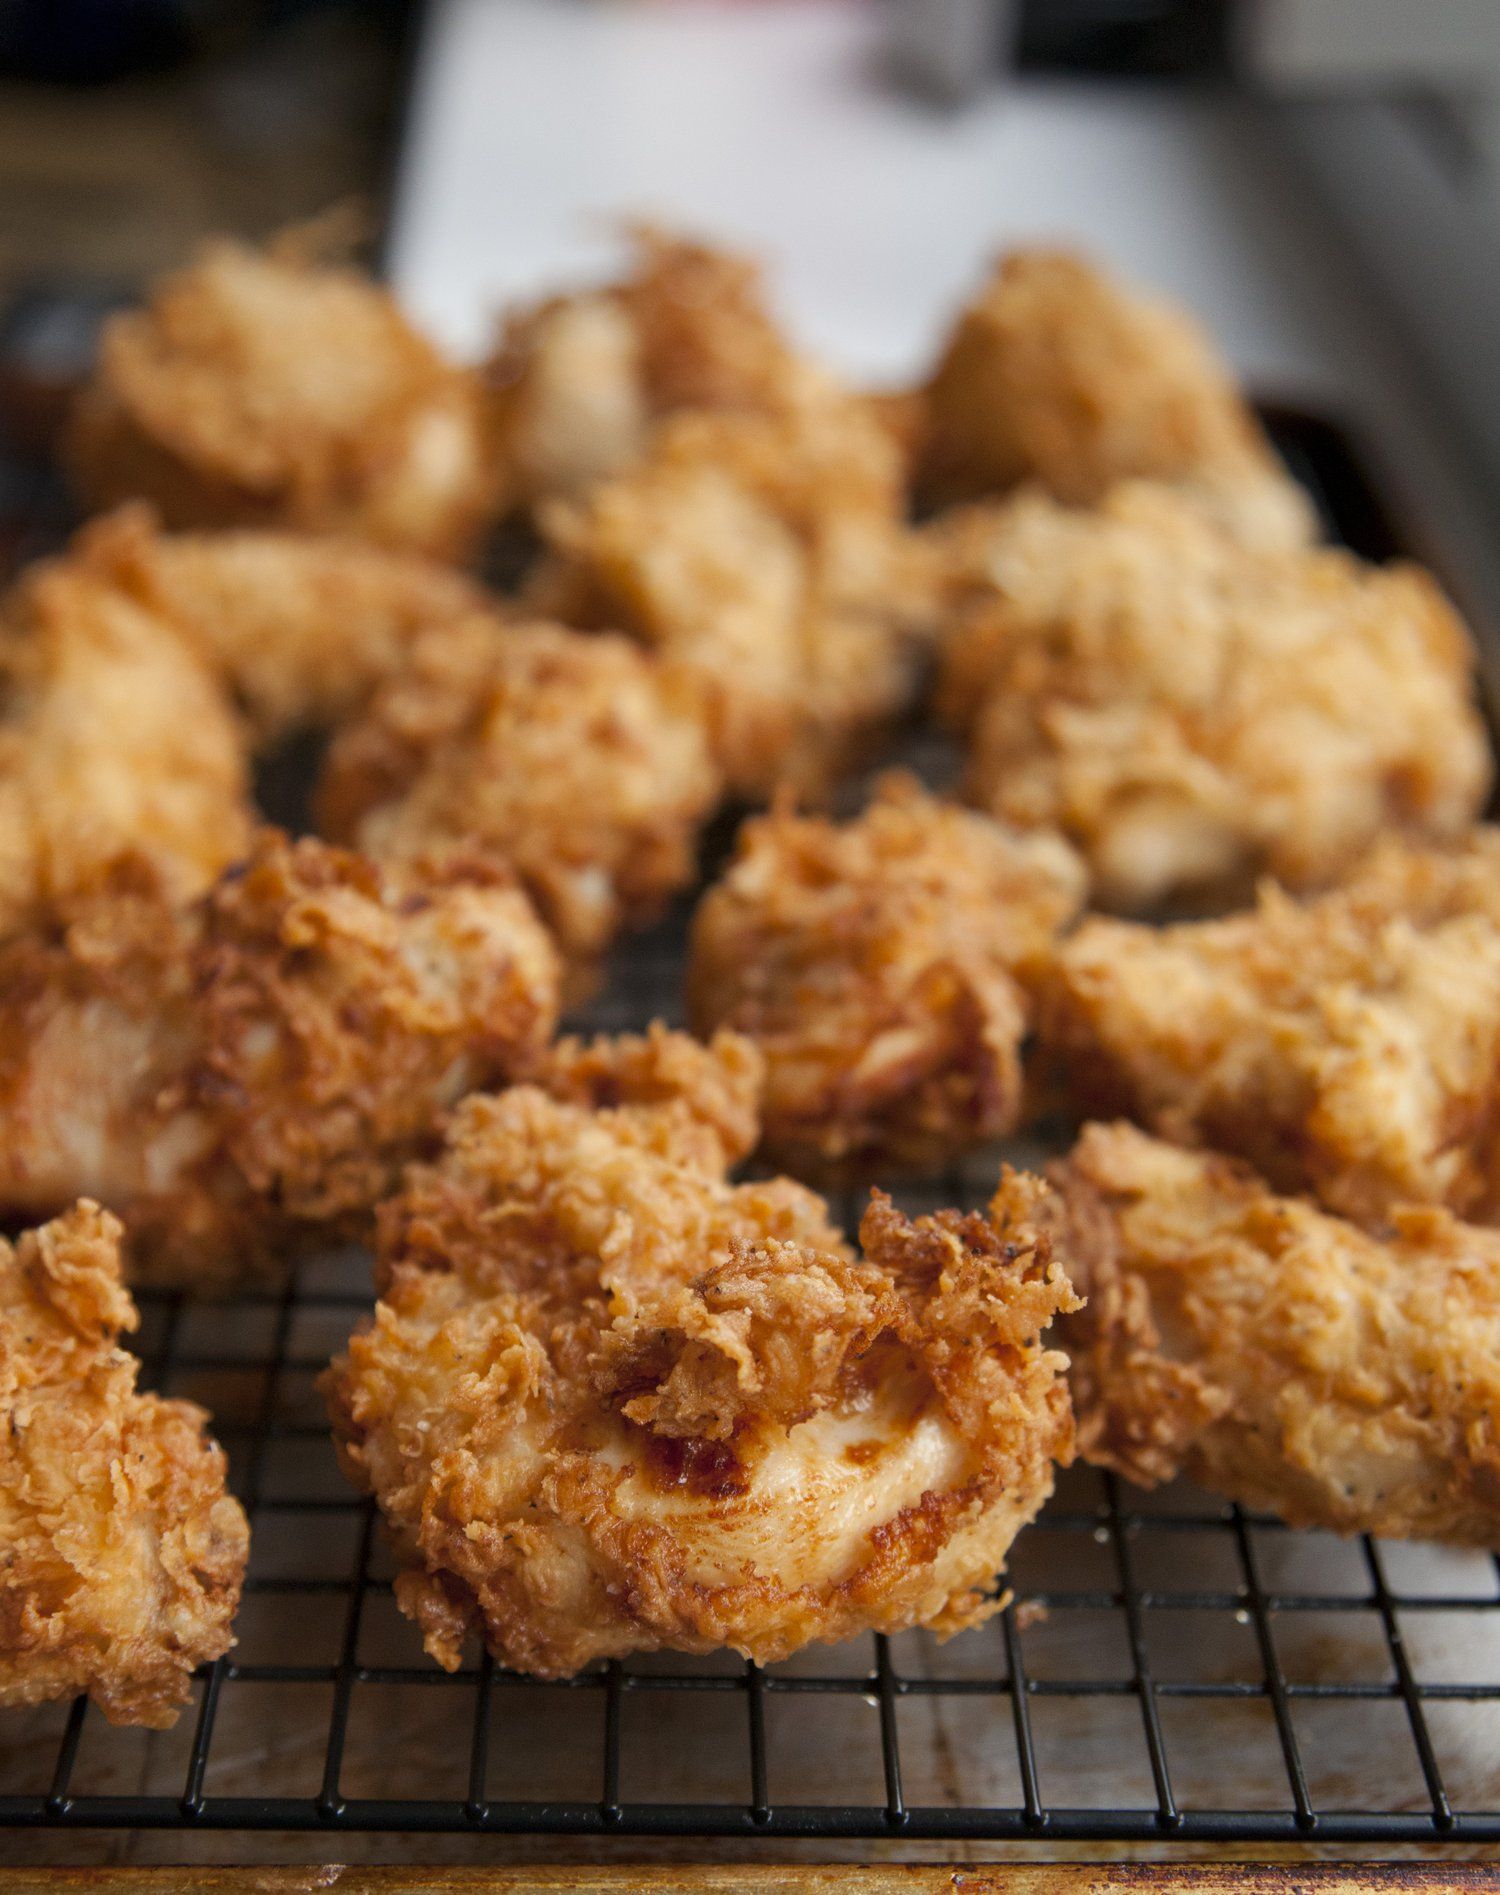 Fried Chicken, done right - tender on the inside, crispy on the outside!